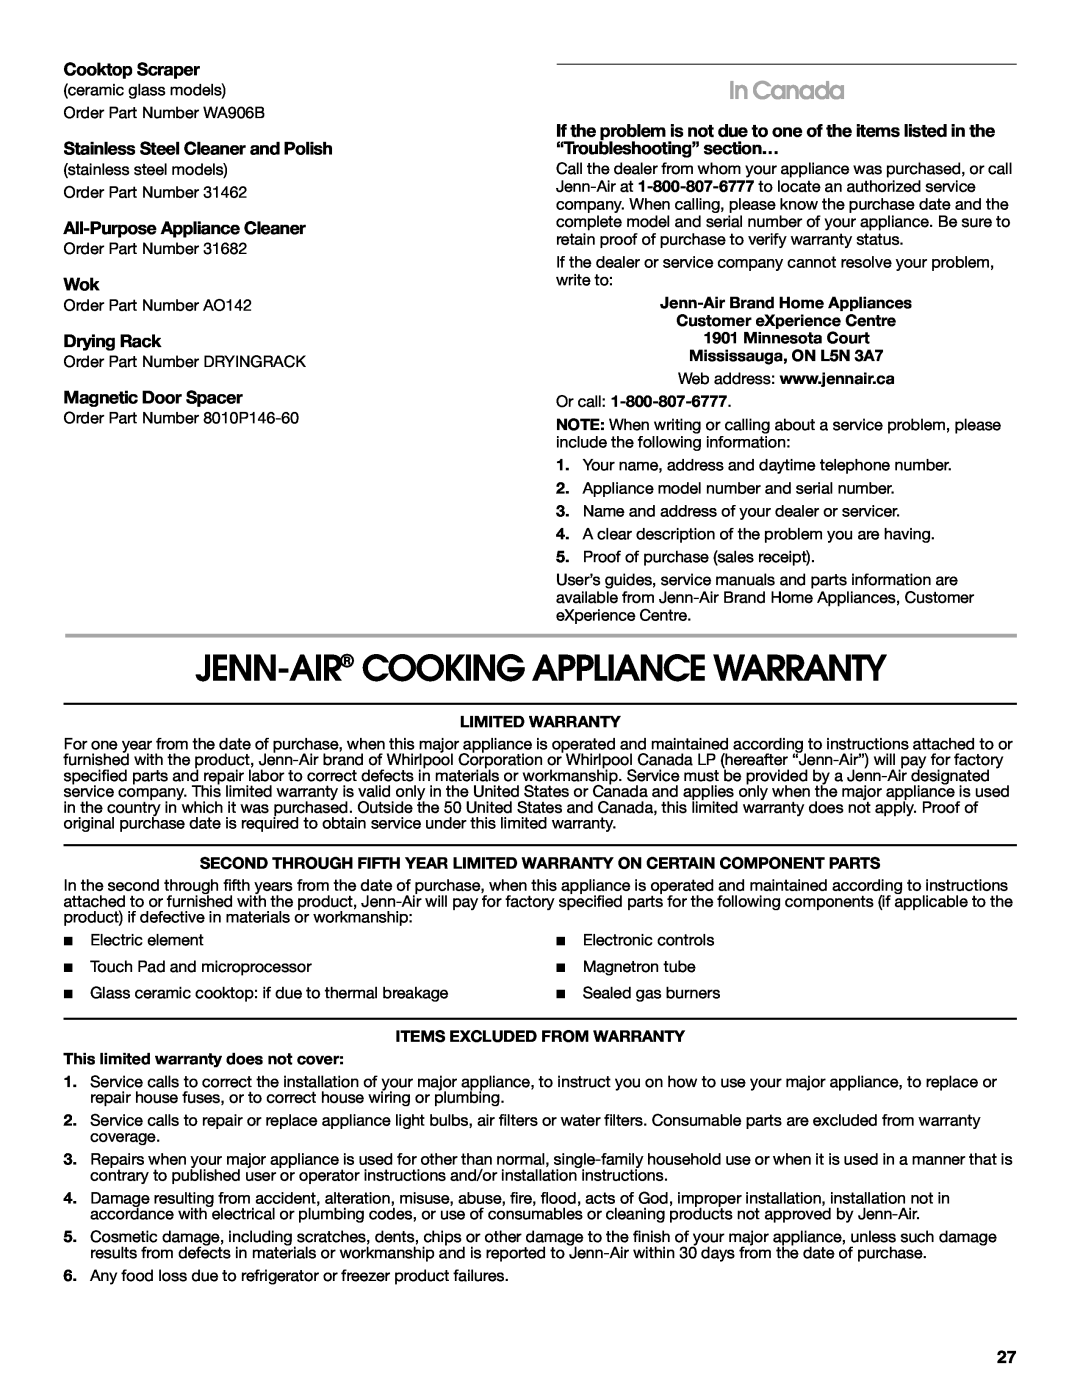 Jenn-Air JES9800 manual Jenn-Air Cooking Appliance Warranty, In Canada, Cooktop Scraper, Stainless Steel Cleaner and Polish 